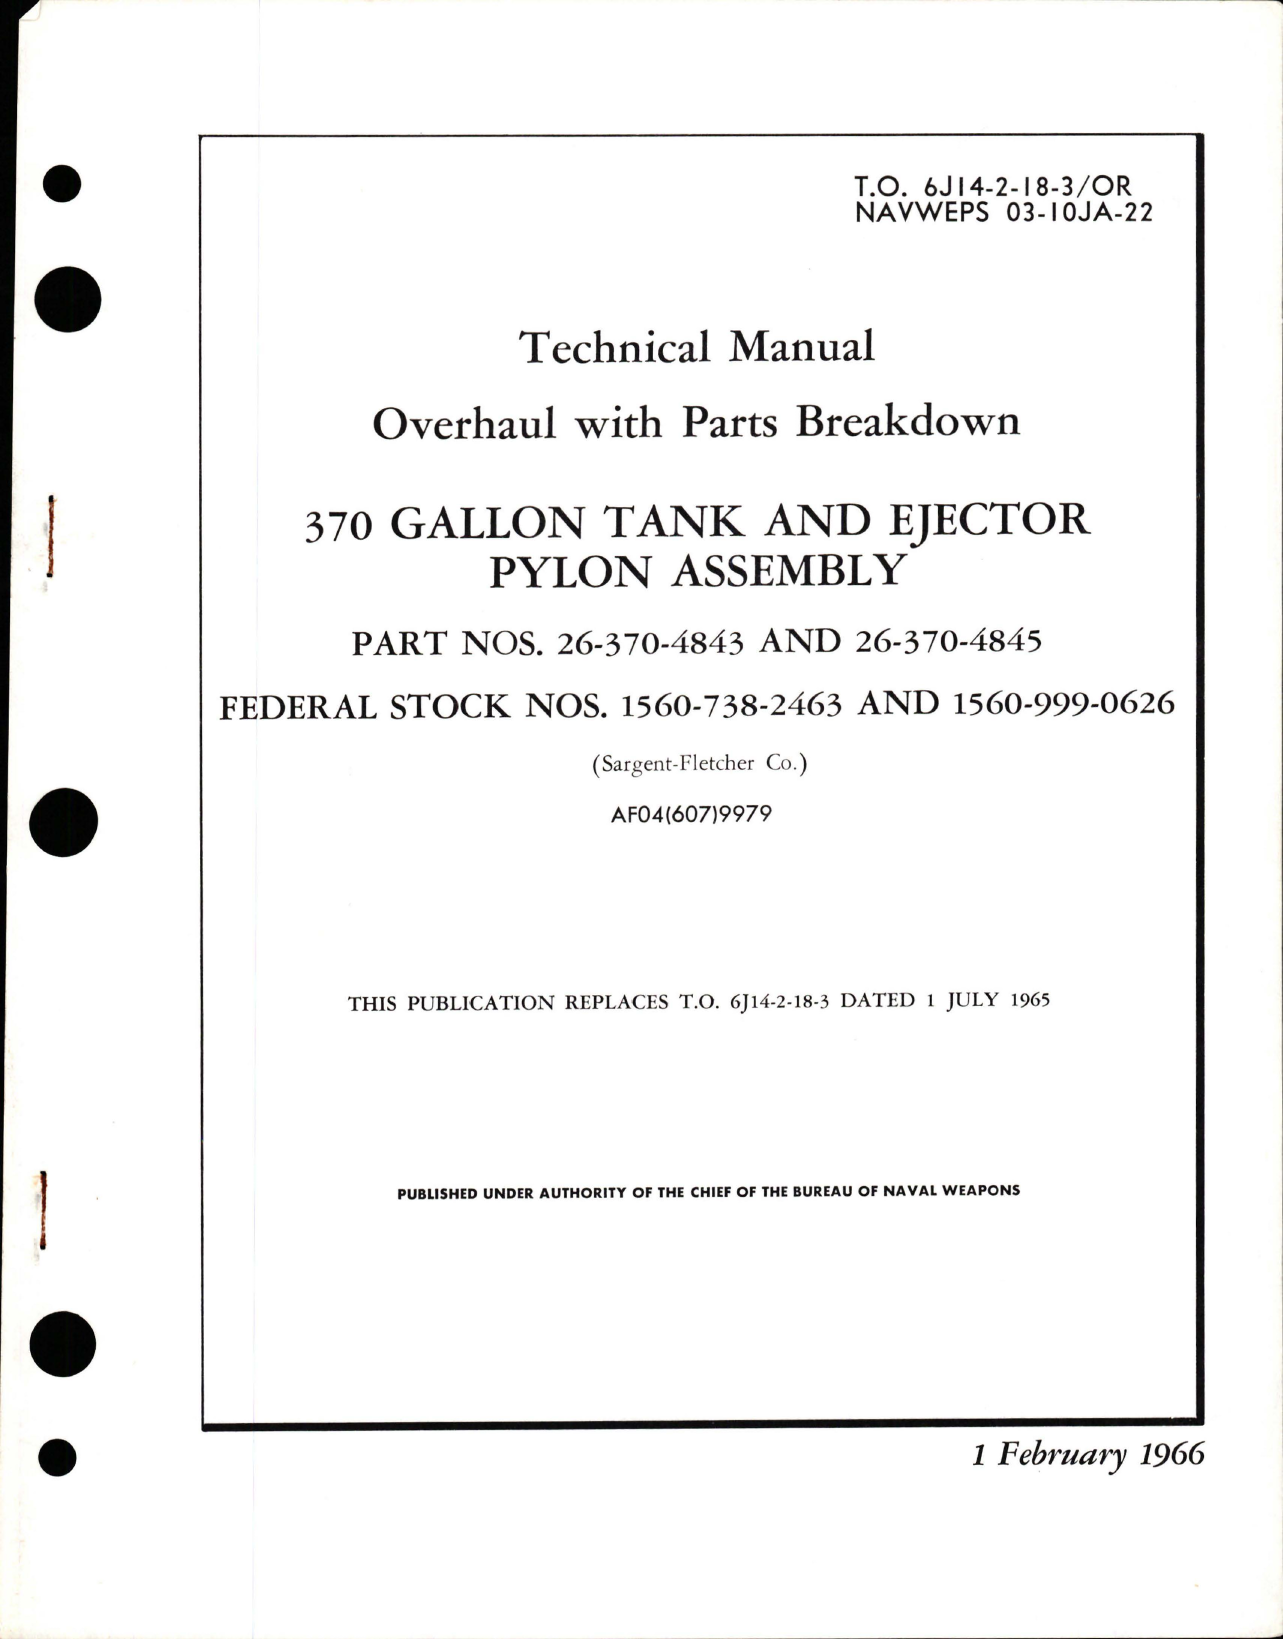 Sample page 1 from AirCorps Library document: Overhaul with Parts Breakdown for Tank and Ejector Pylon Assembly - 370 Gallon - Parts 26-370-4843 and 26-370-4845